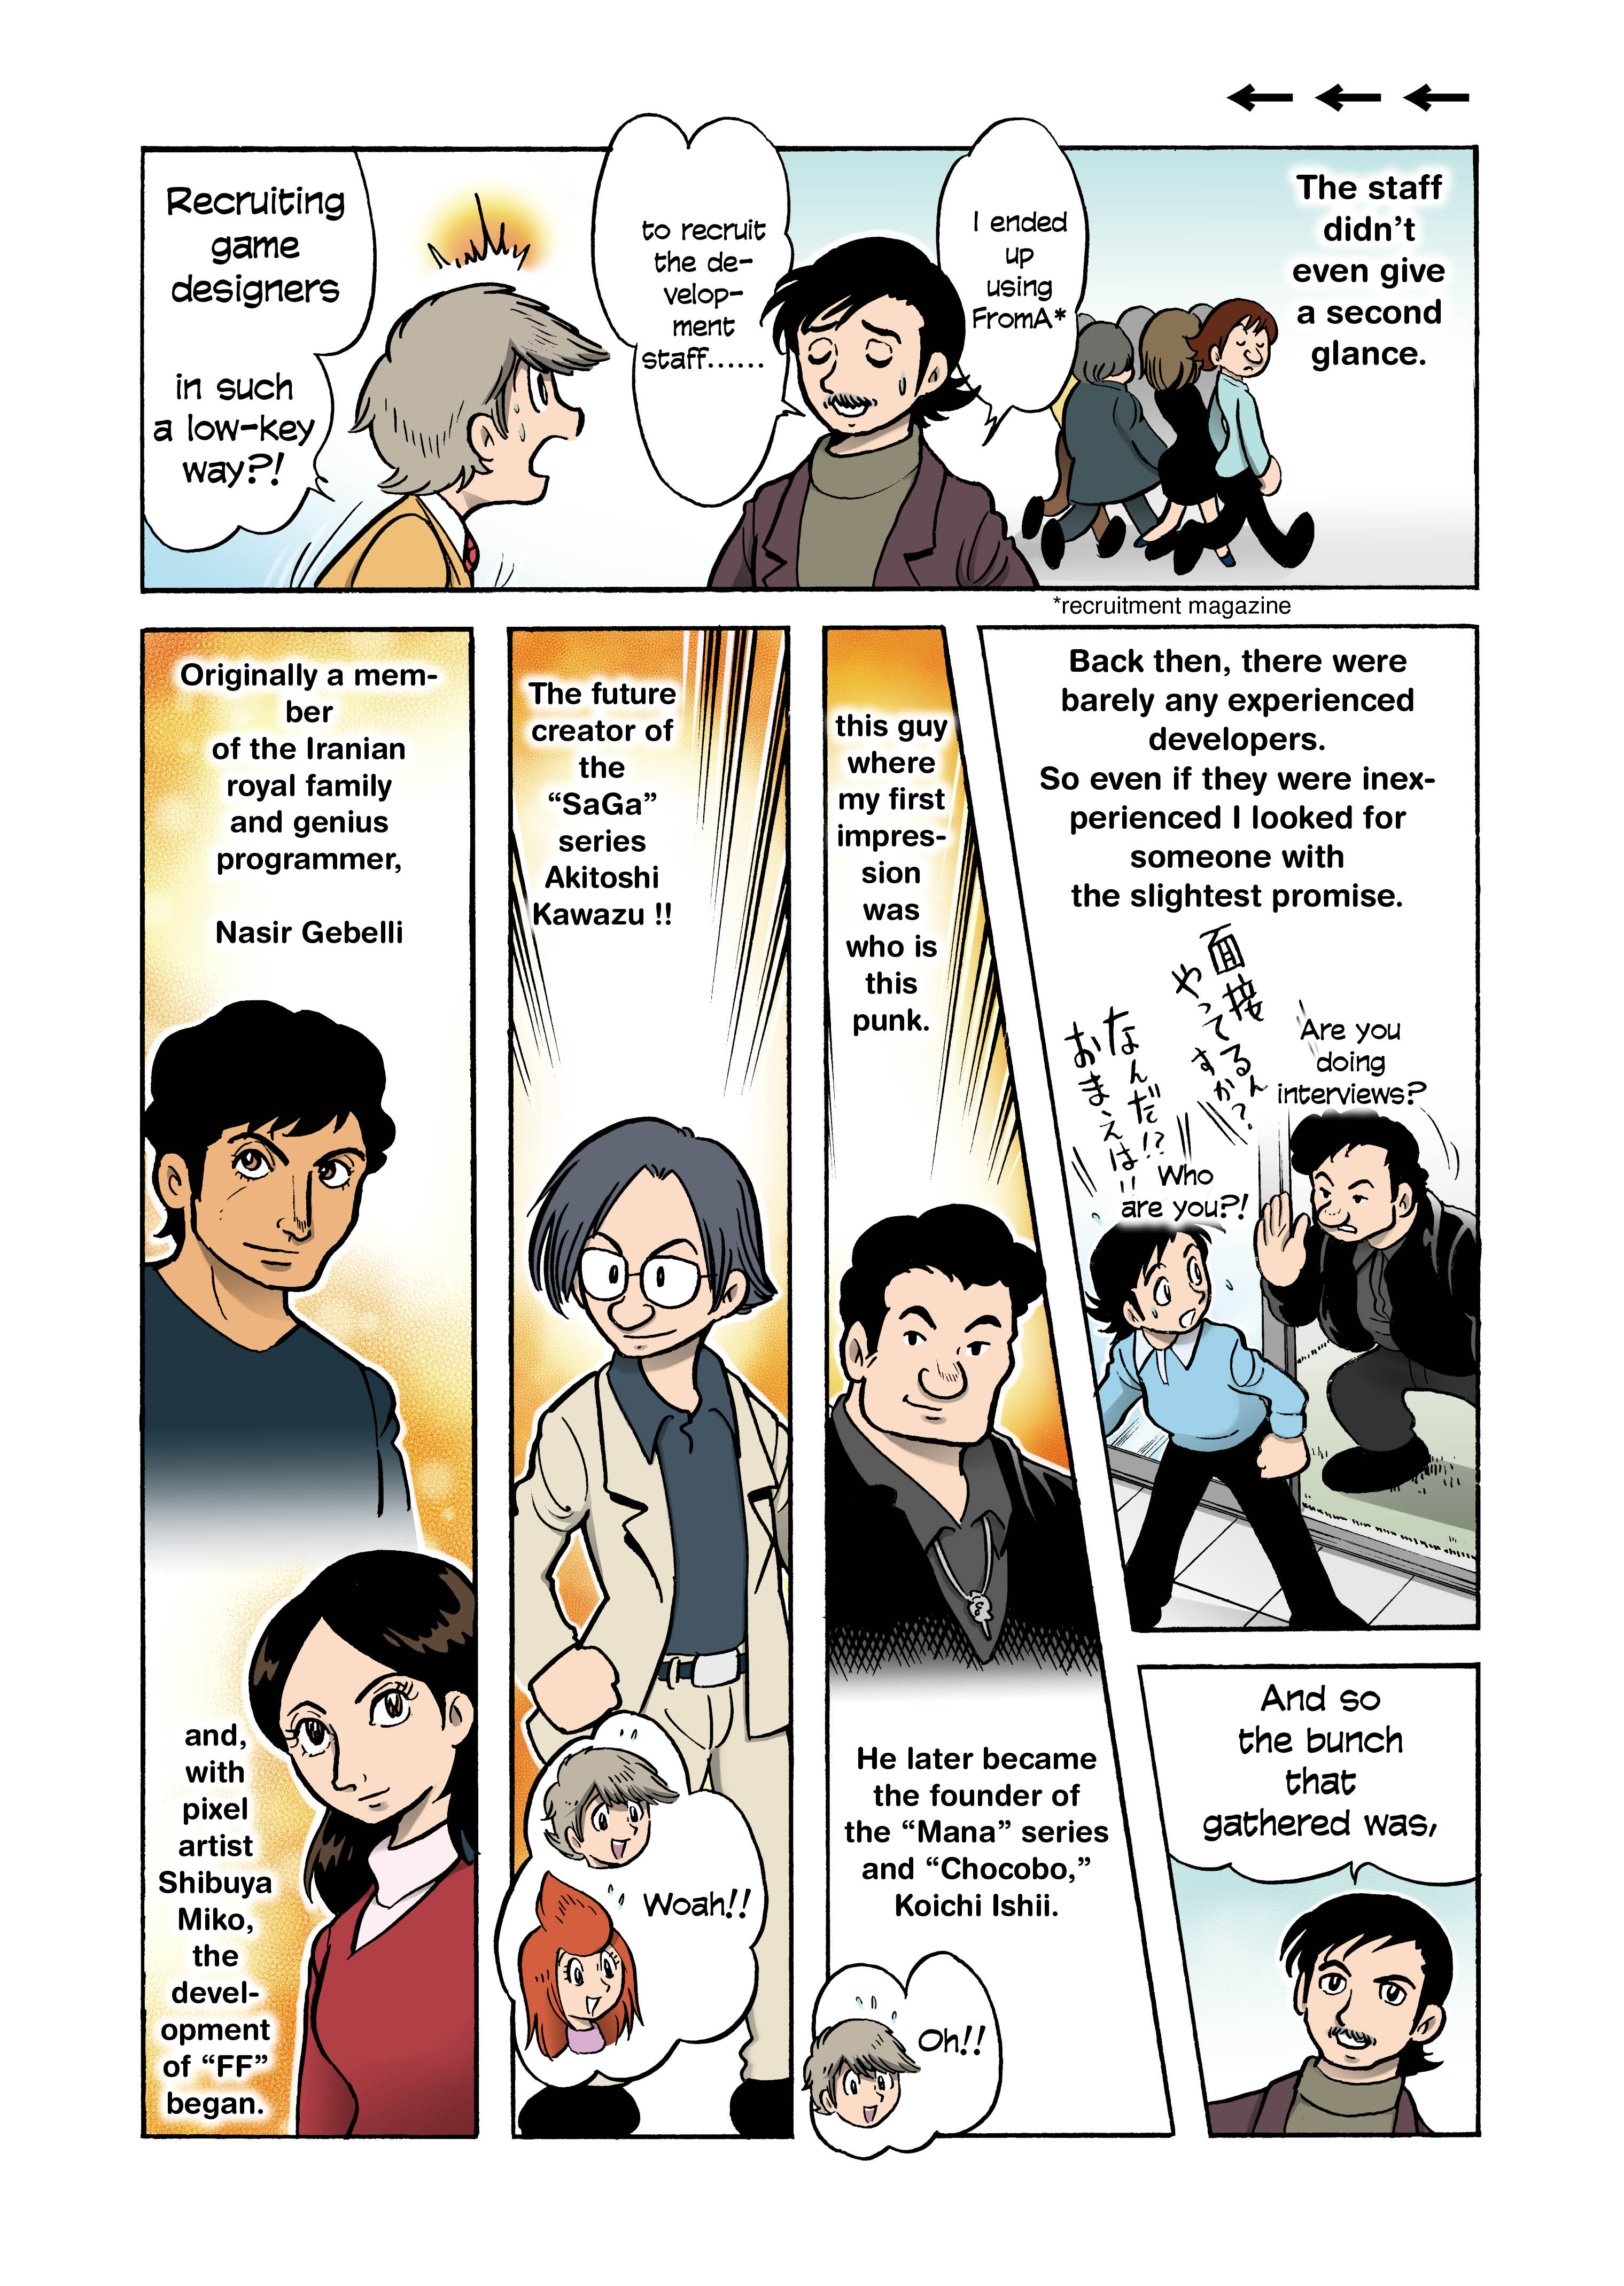 【New Comic Series】Hironobu Sakaguchi and FF programmers’ try to rival DQ [Game Designers in their ‘early’ days]_008